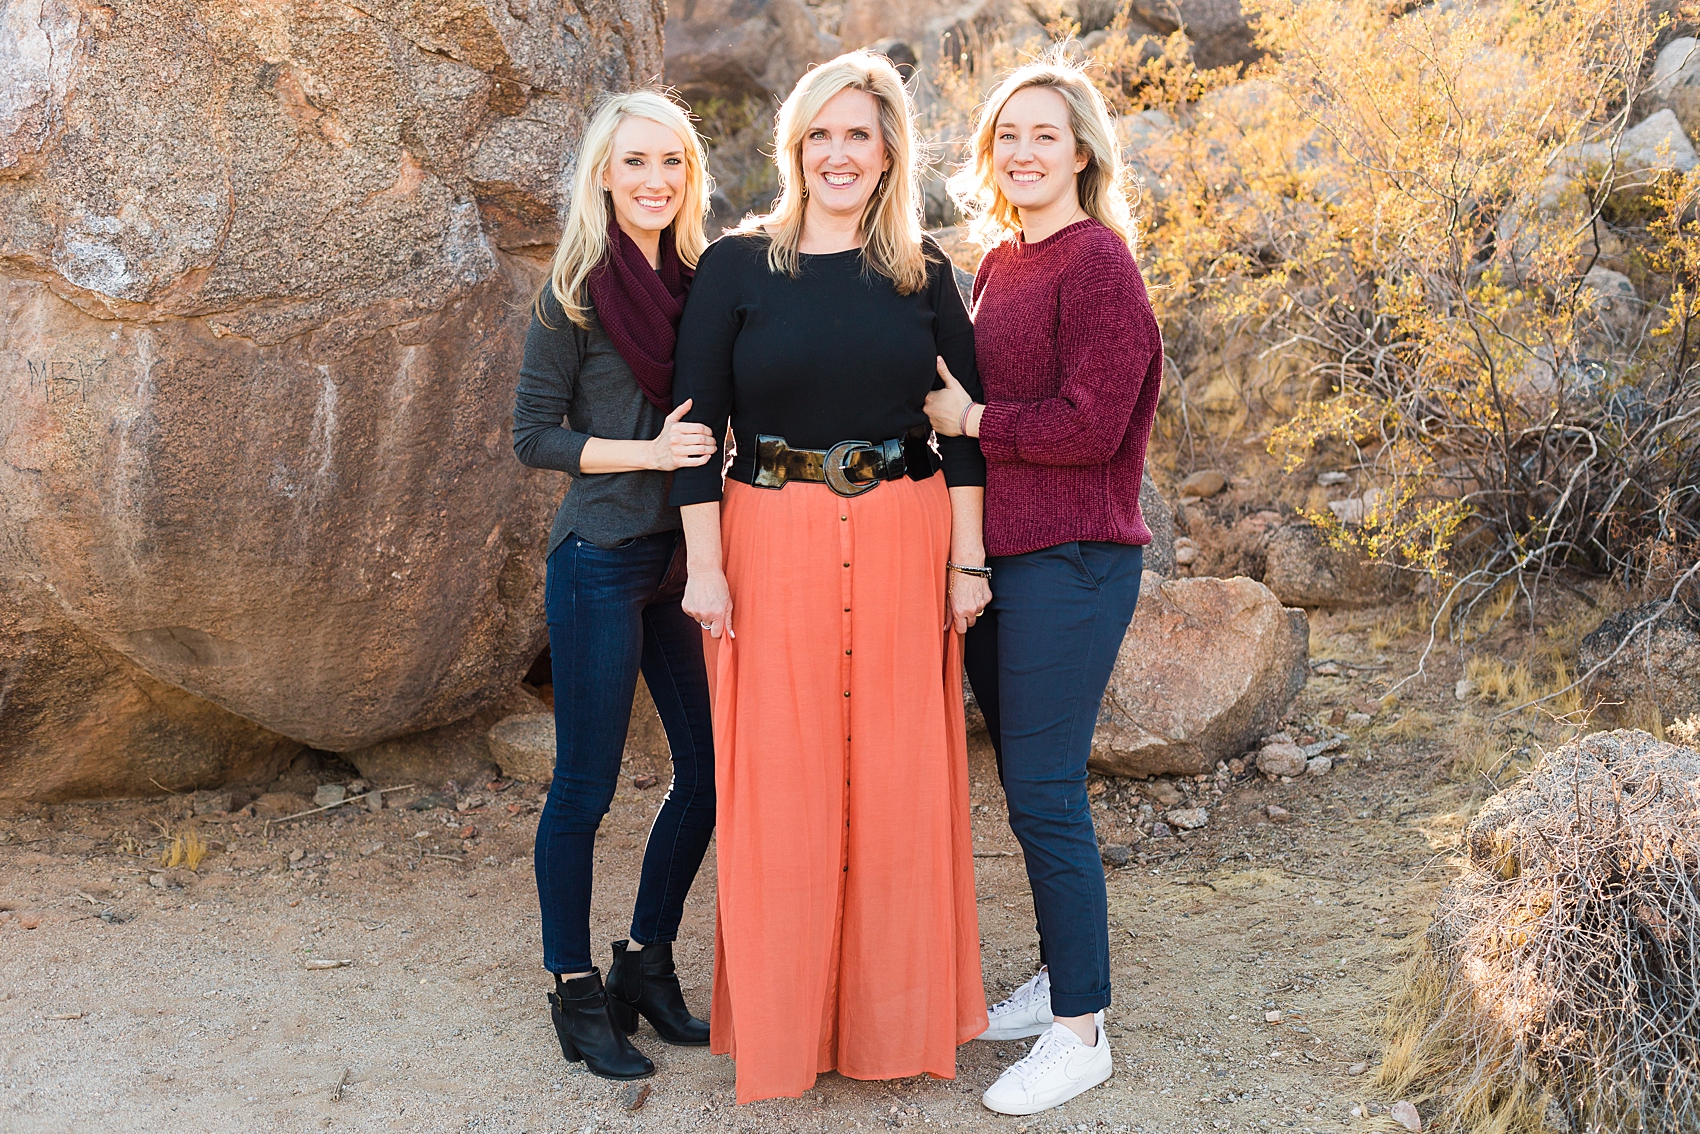 Leah Hope Photography | Downtown Phoenix Arizona | Desert Landscape Cactus Scenery | Family Pictures | What to Wear | Family Poses 